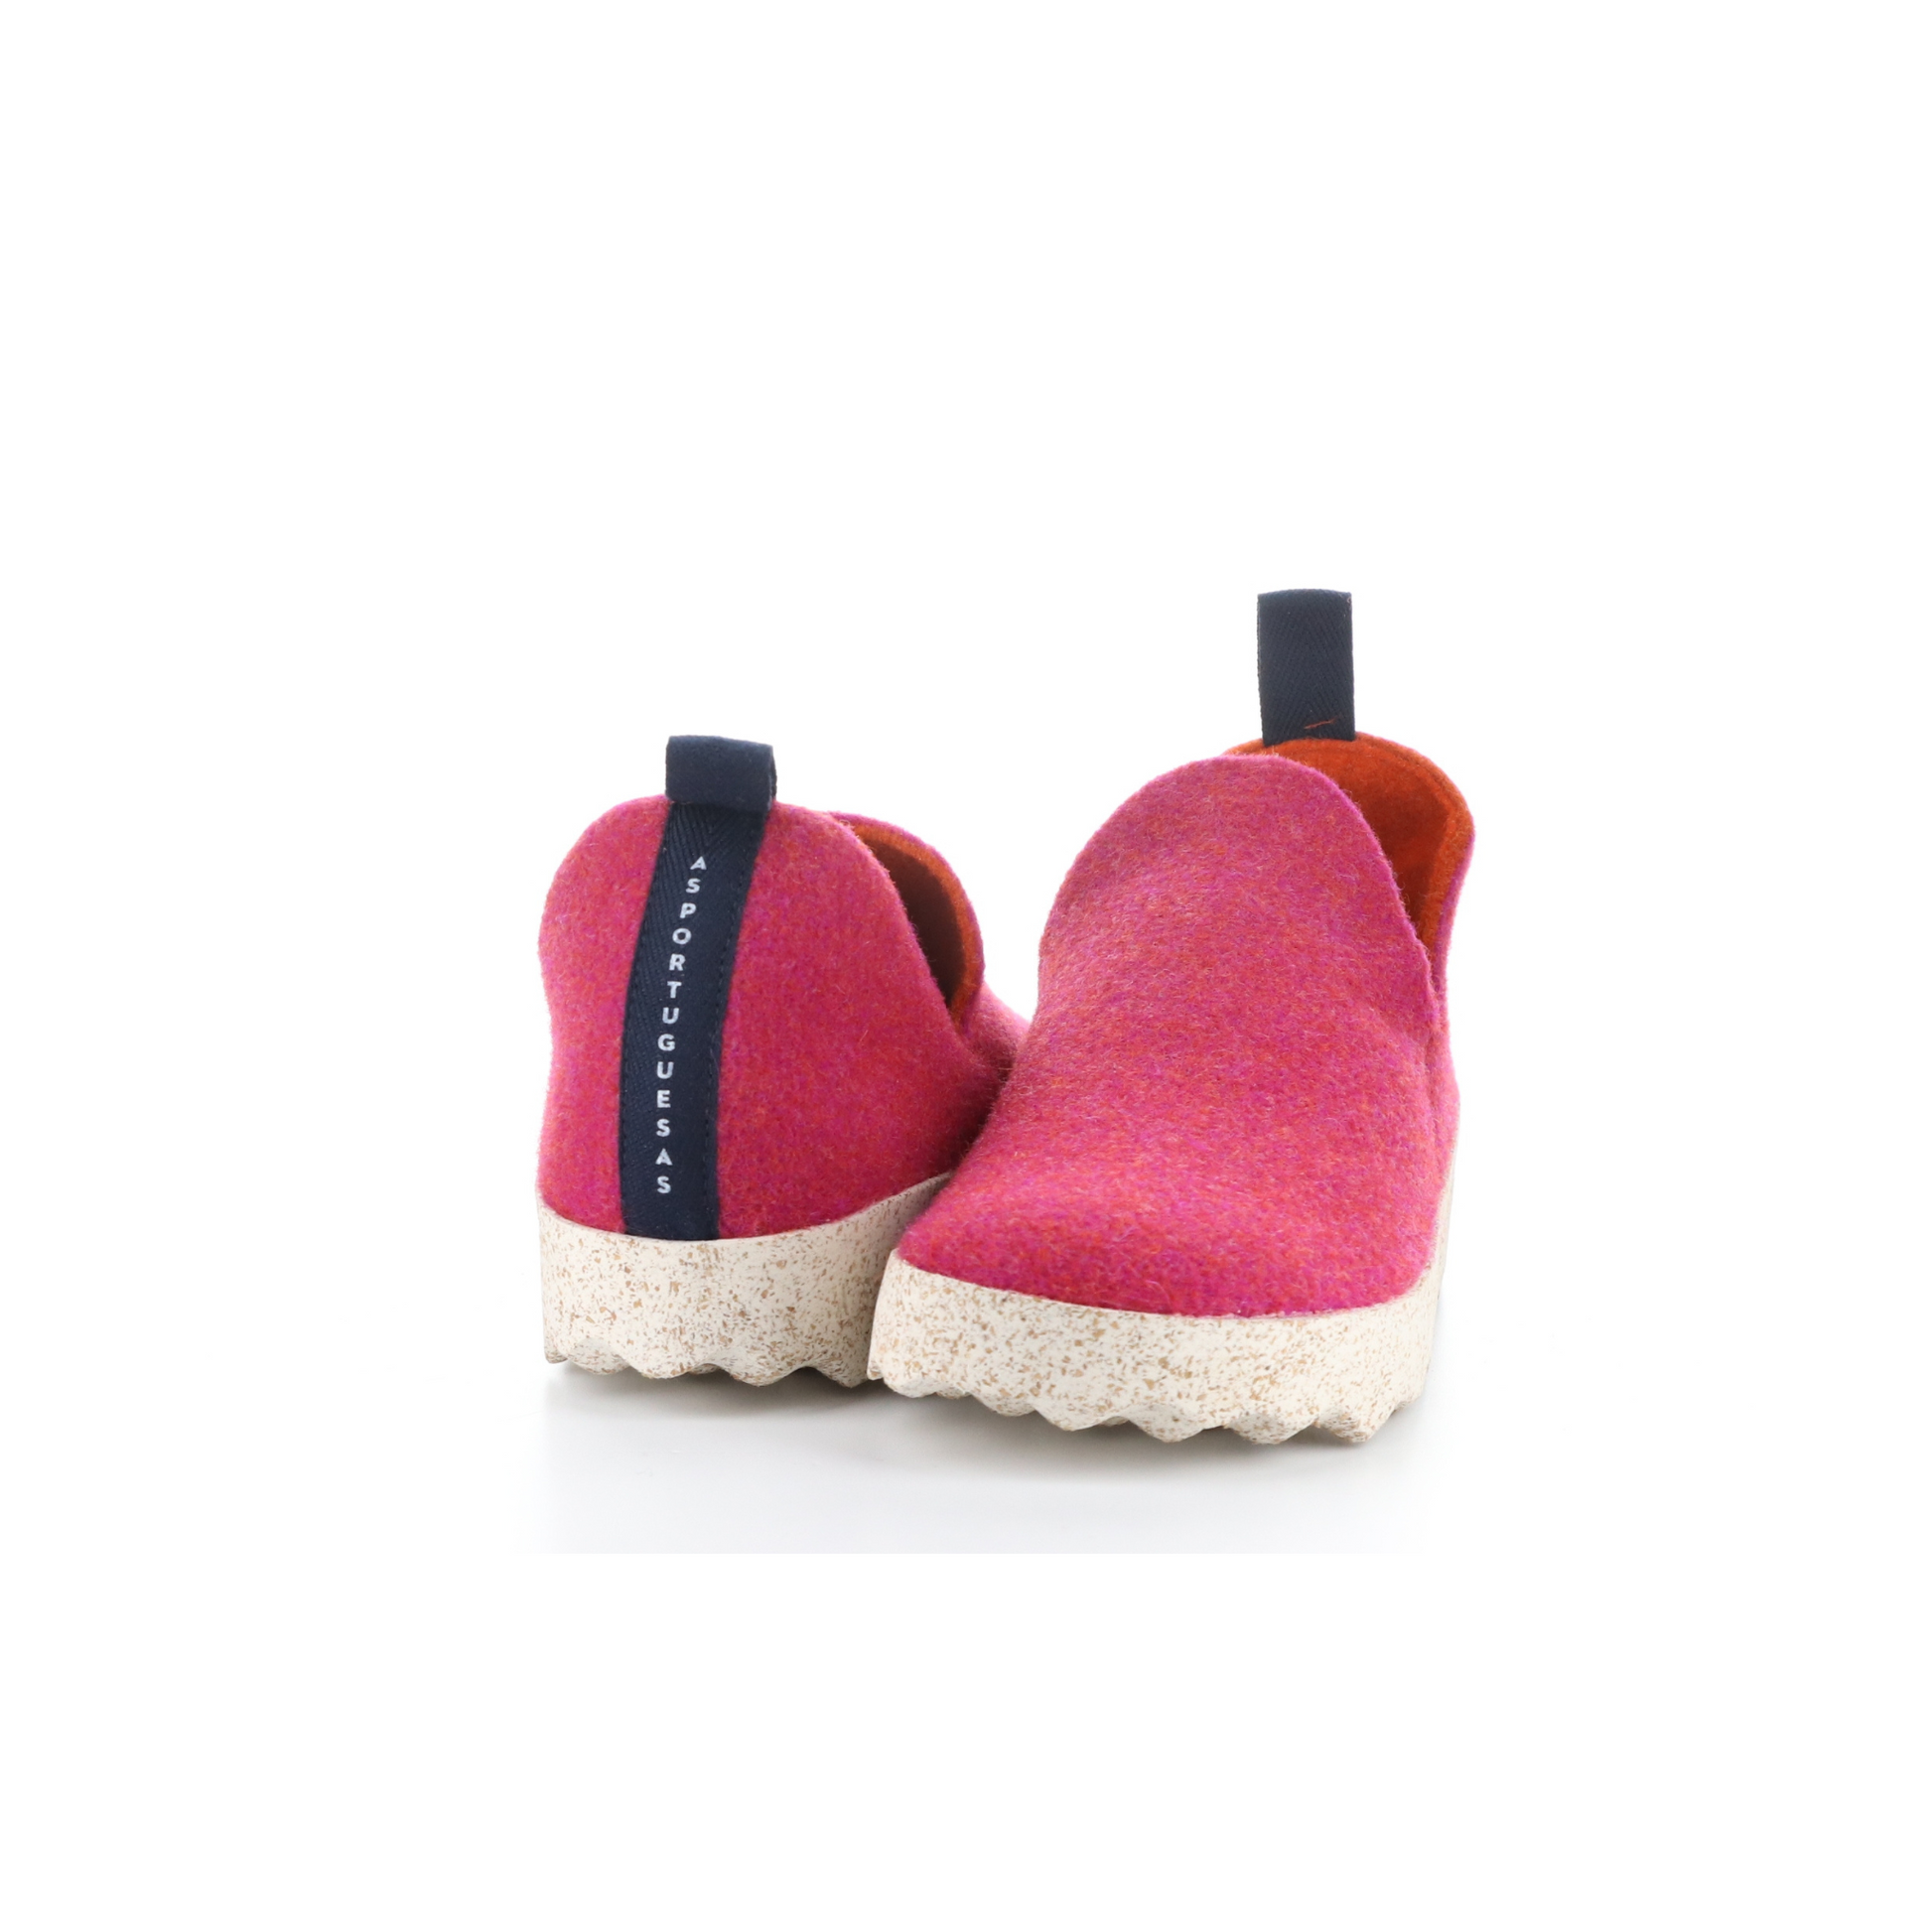 A pair of slip on shoes with stylish cut out detail for easy on is pictured. Upper is Fuchsia, felted wool on a natural cork and rubber waffle sole. Sole is branded and a very light natural colour.